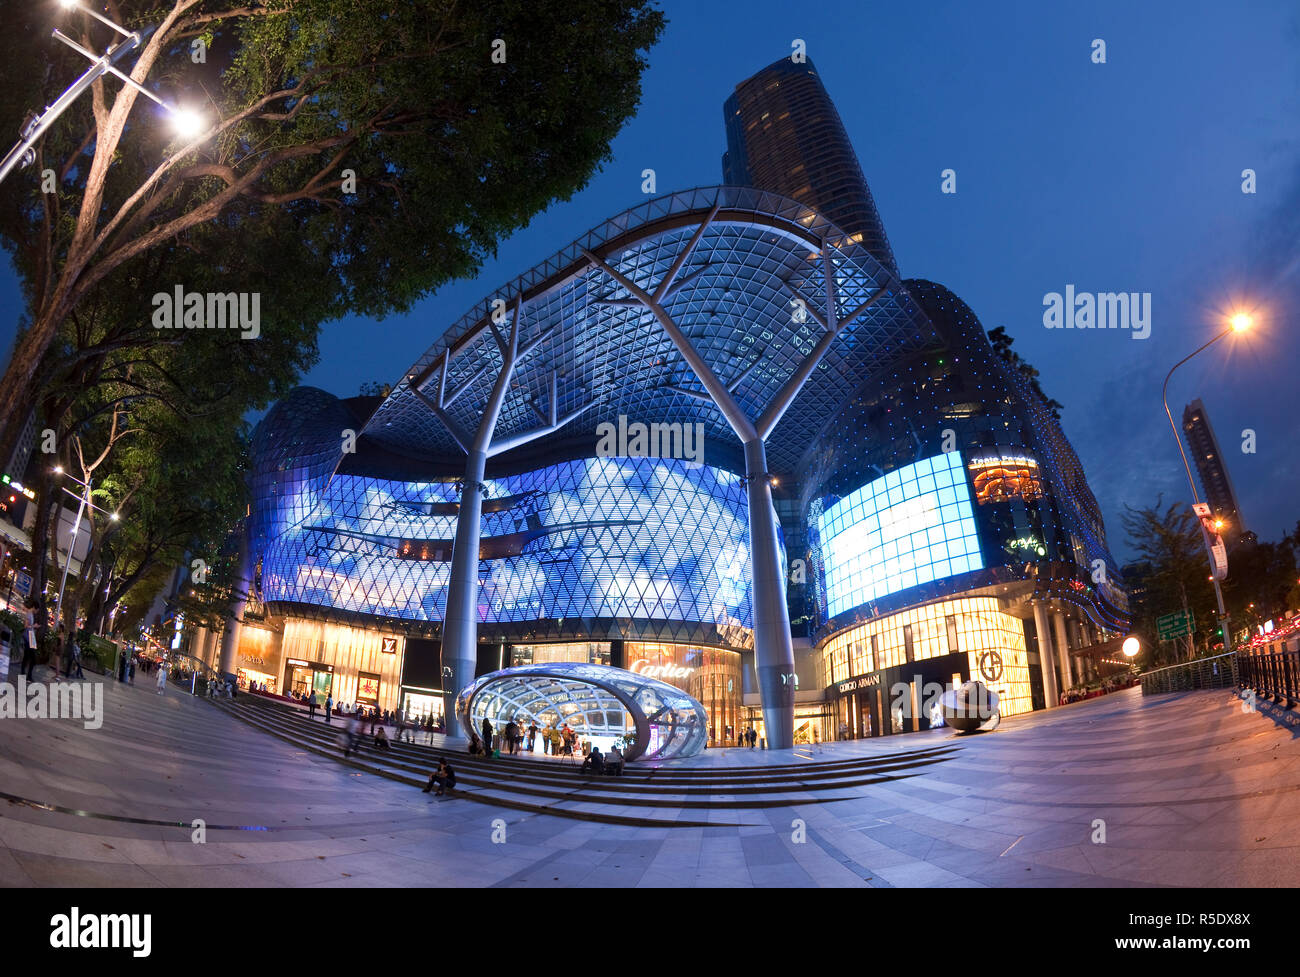 Ion Orchard Shopping Mall, Orchard Road, Singapur Stockfoto